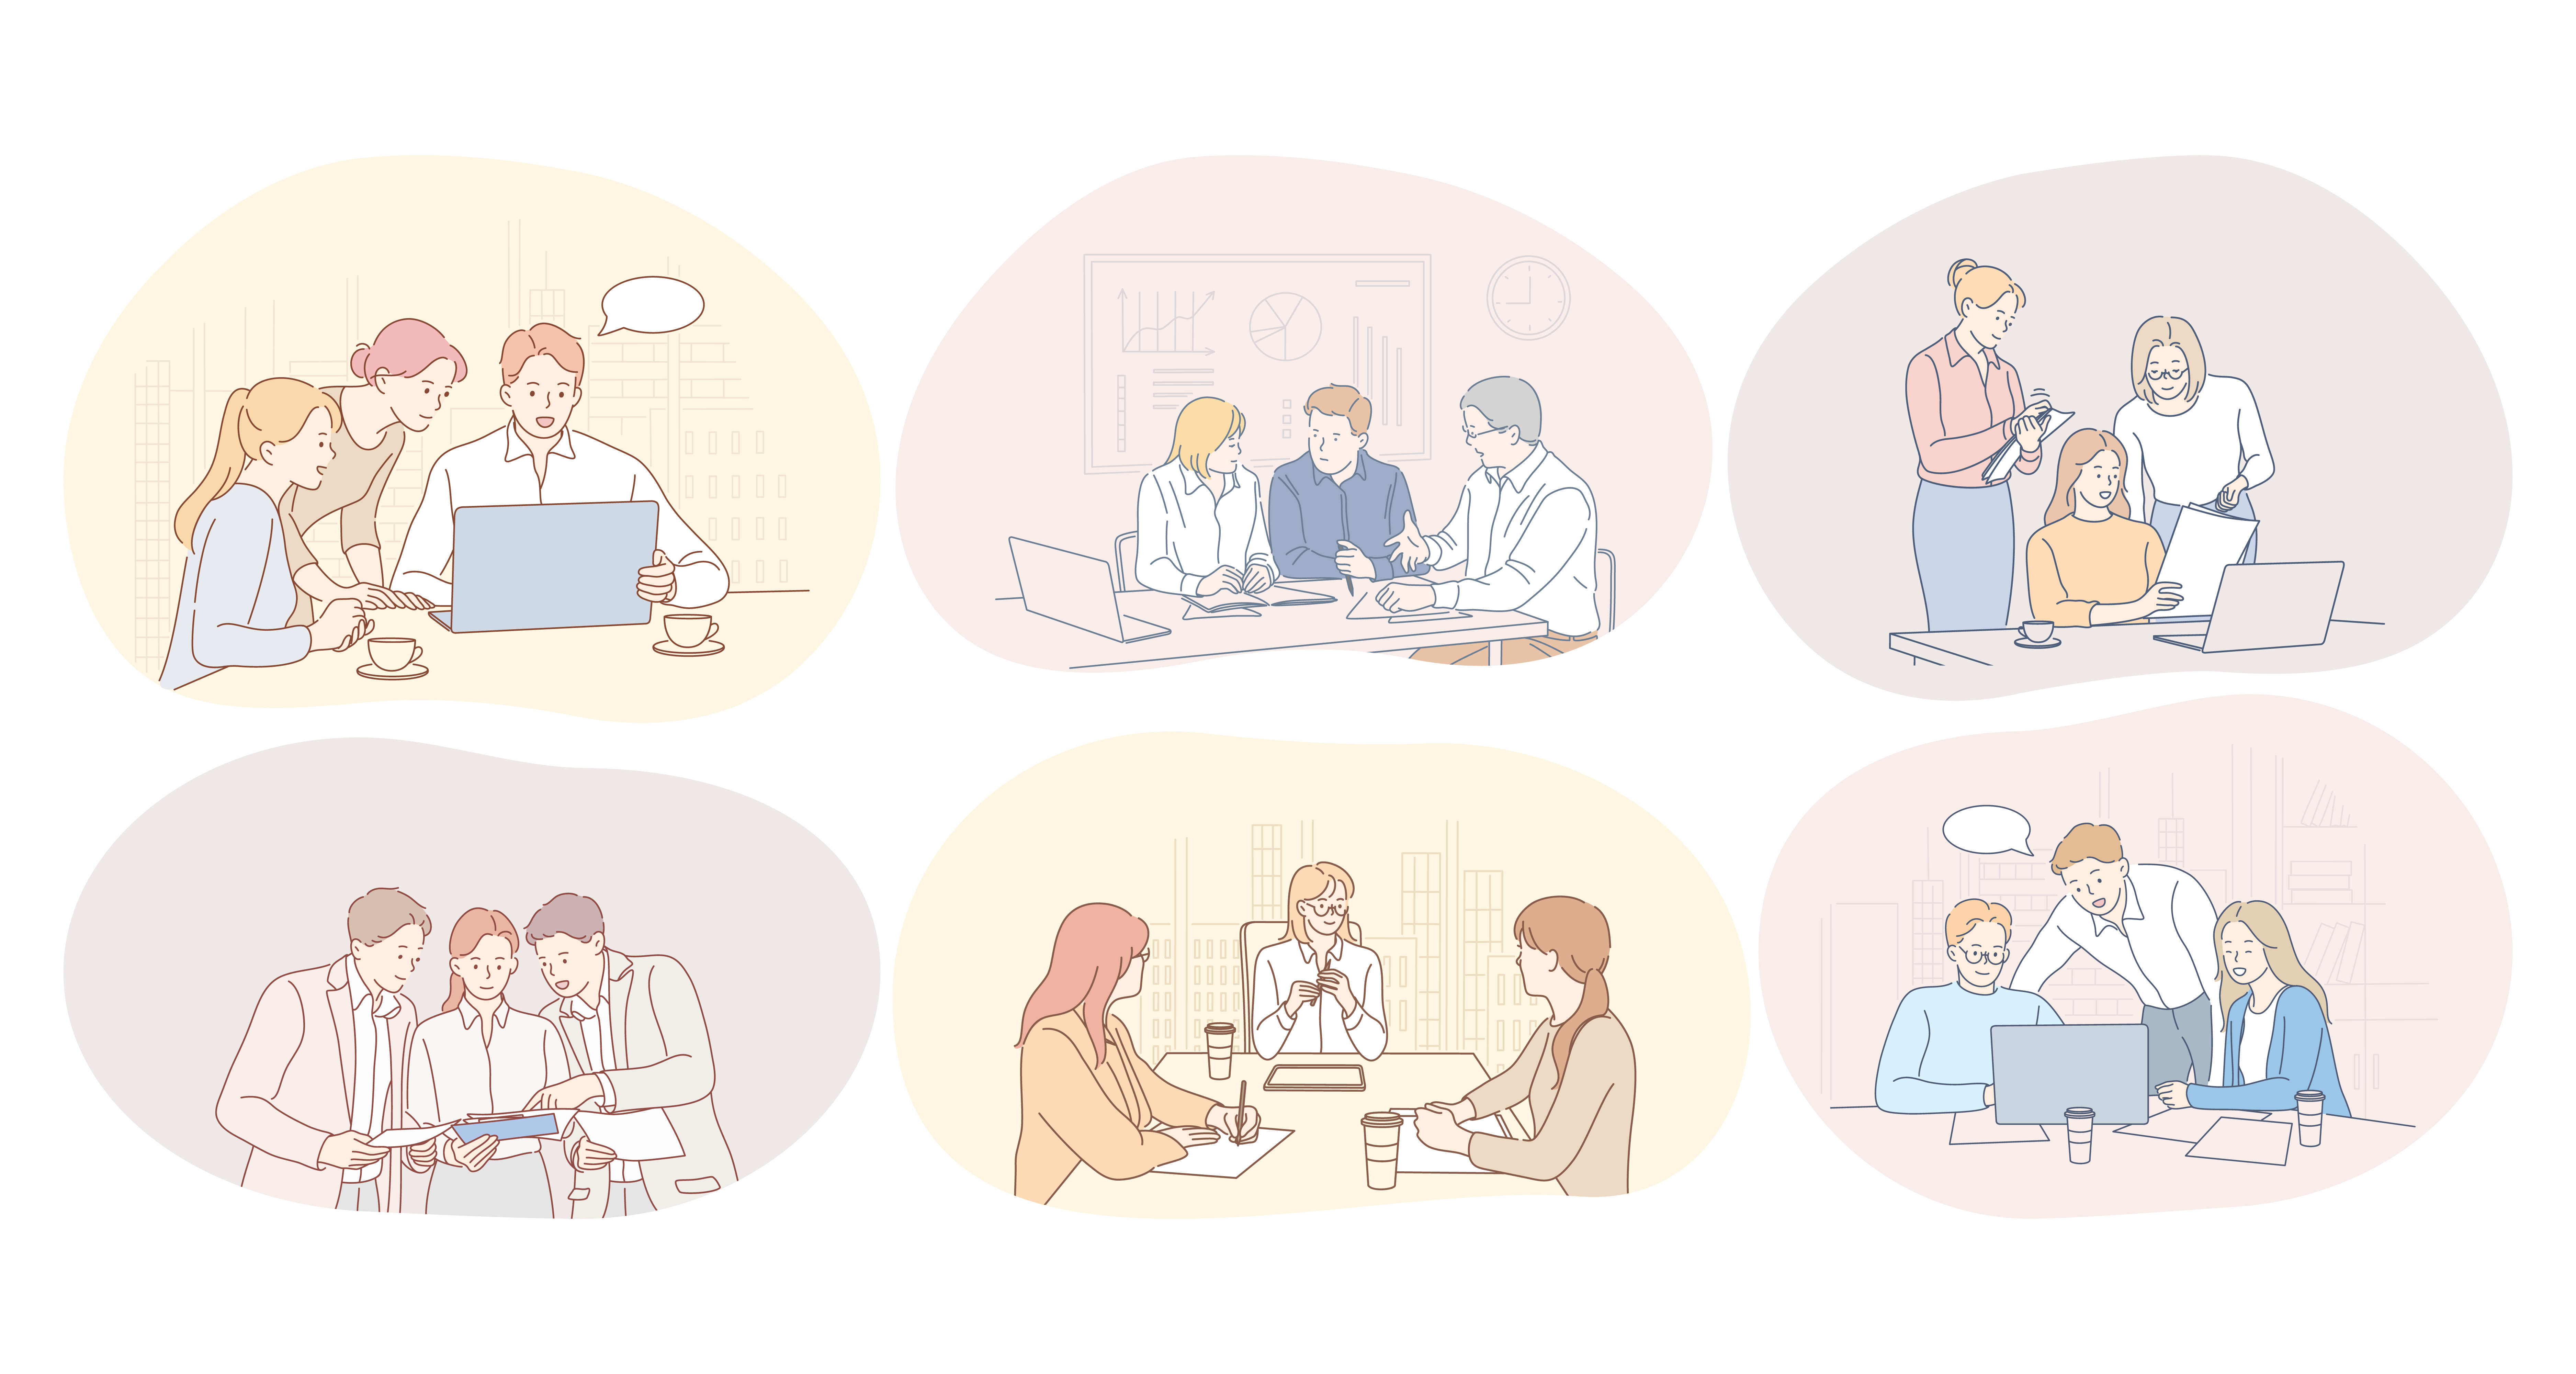 Teamwork, communication, meeting, discussion, collaboration concept. Business people partners coworkers cartoon characters discussing projects, having brainstormings and meetings in office . Teamwork, communication, meeting, discussion, collaboration concept